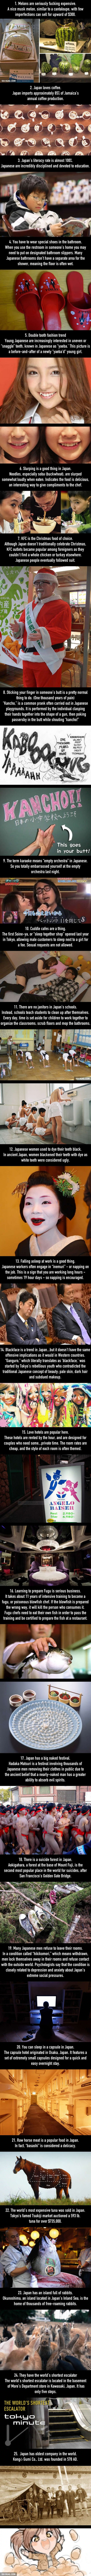 25 Weird Things About Japan